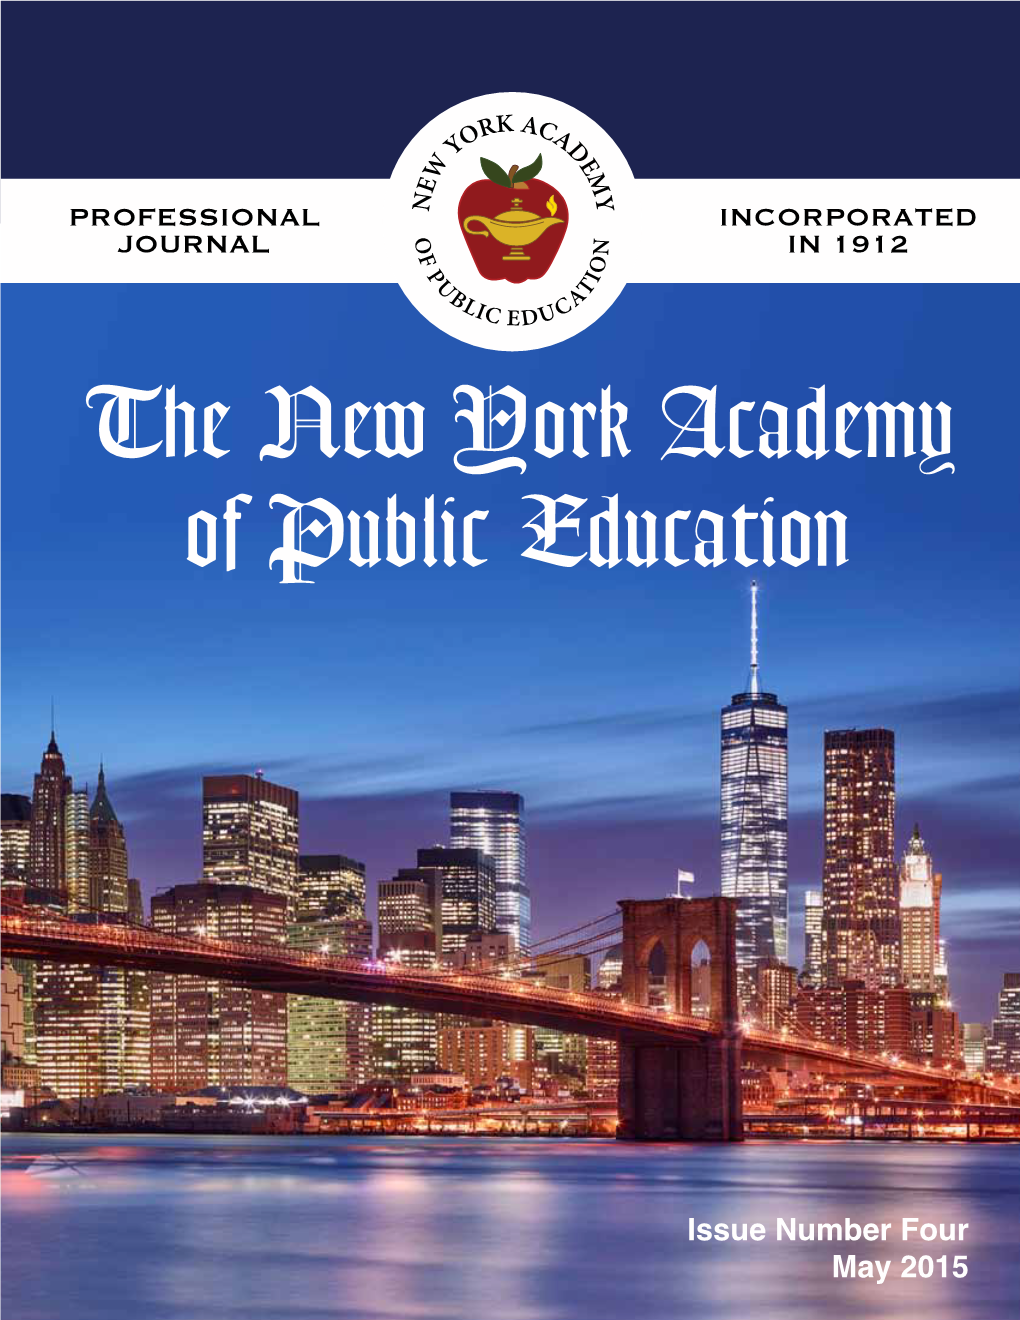 The New York Academy of Public Education